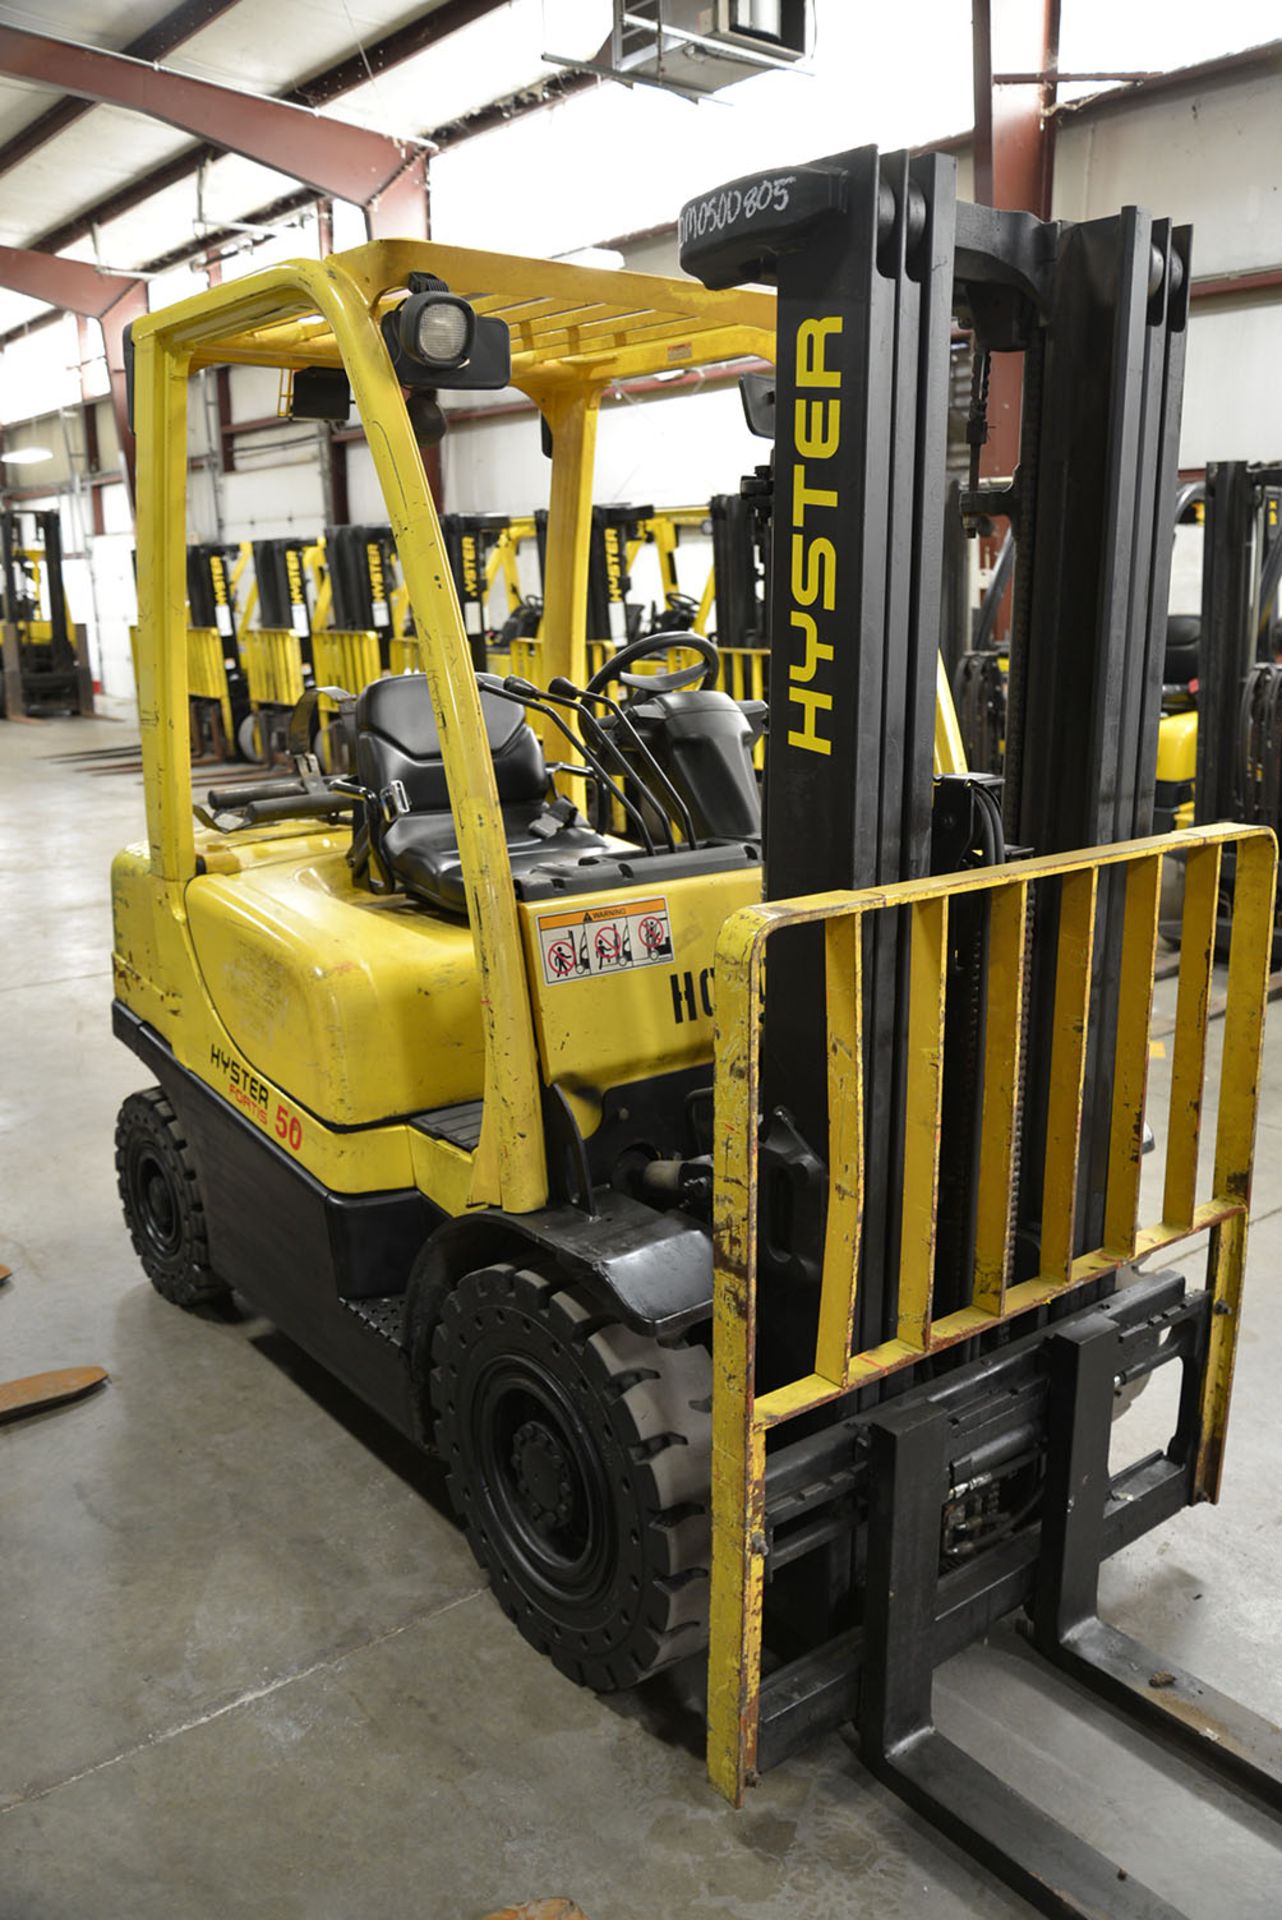 2008 HYSTER 5,000-lb. Capacity Forklift, Model H50FT, LPG, Lever Shift, Pneumatic Tires, 3-Stage - Image 3 of 7